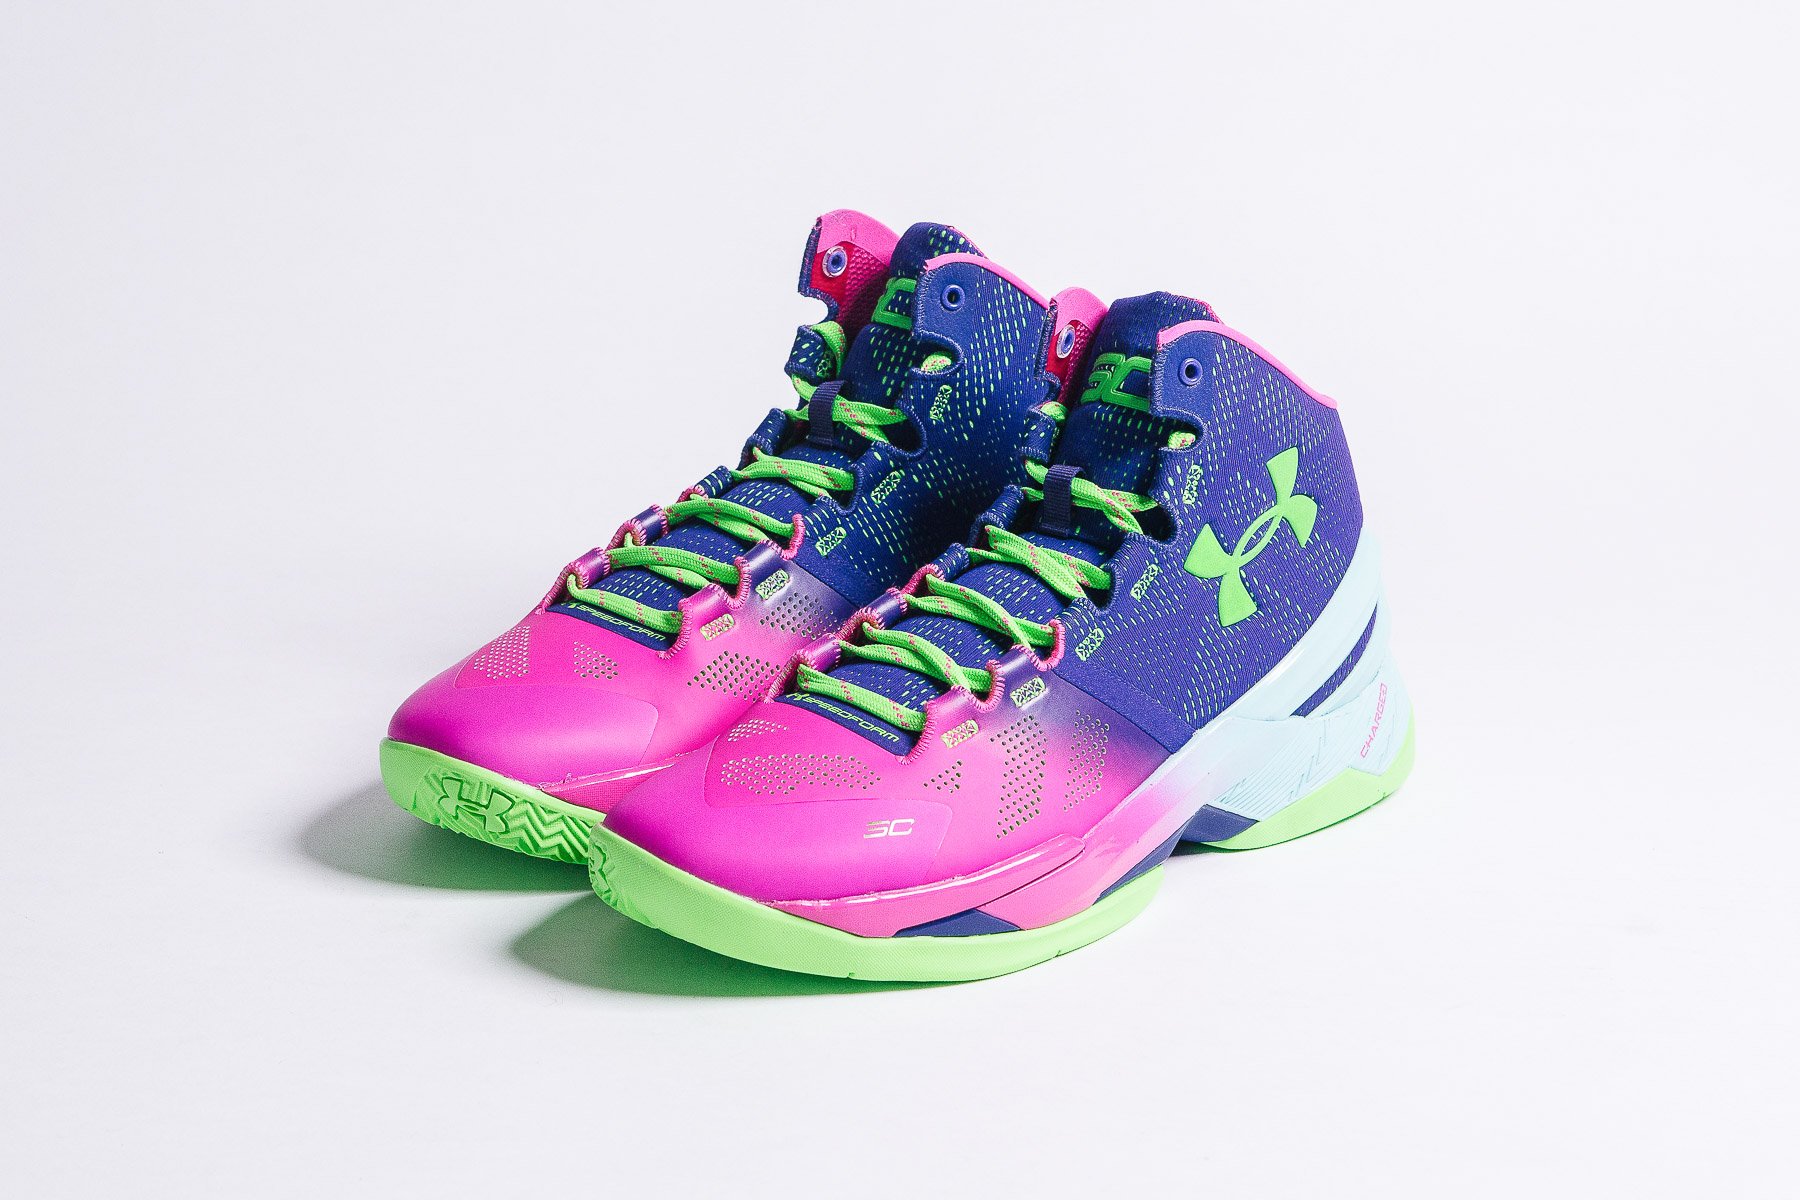 curry 2 northern lights